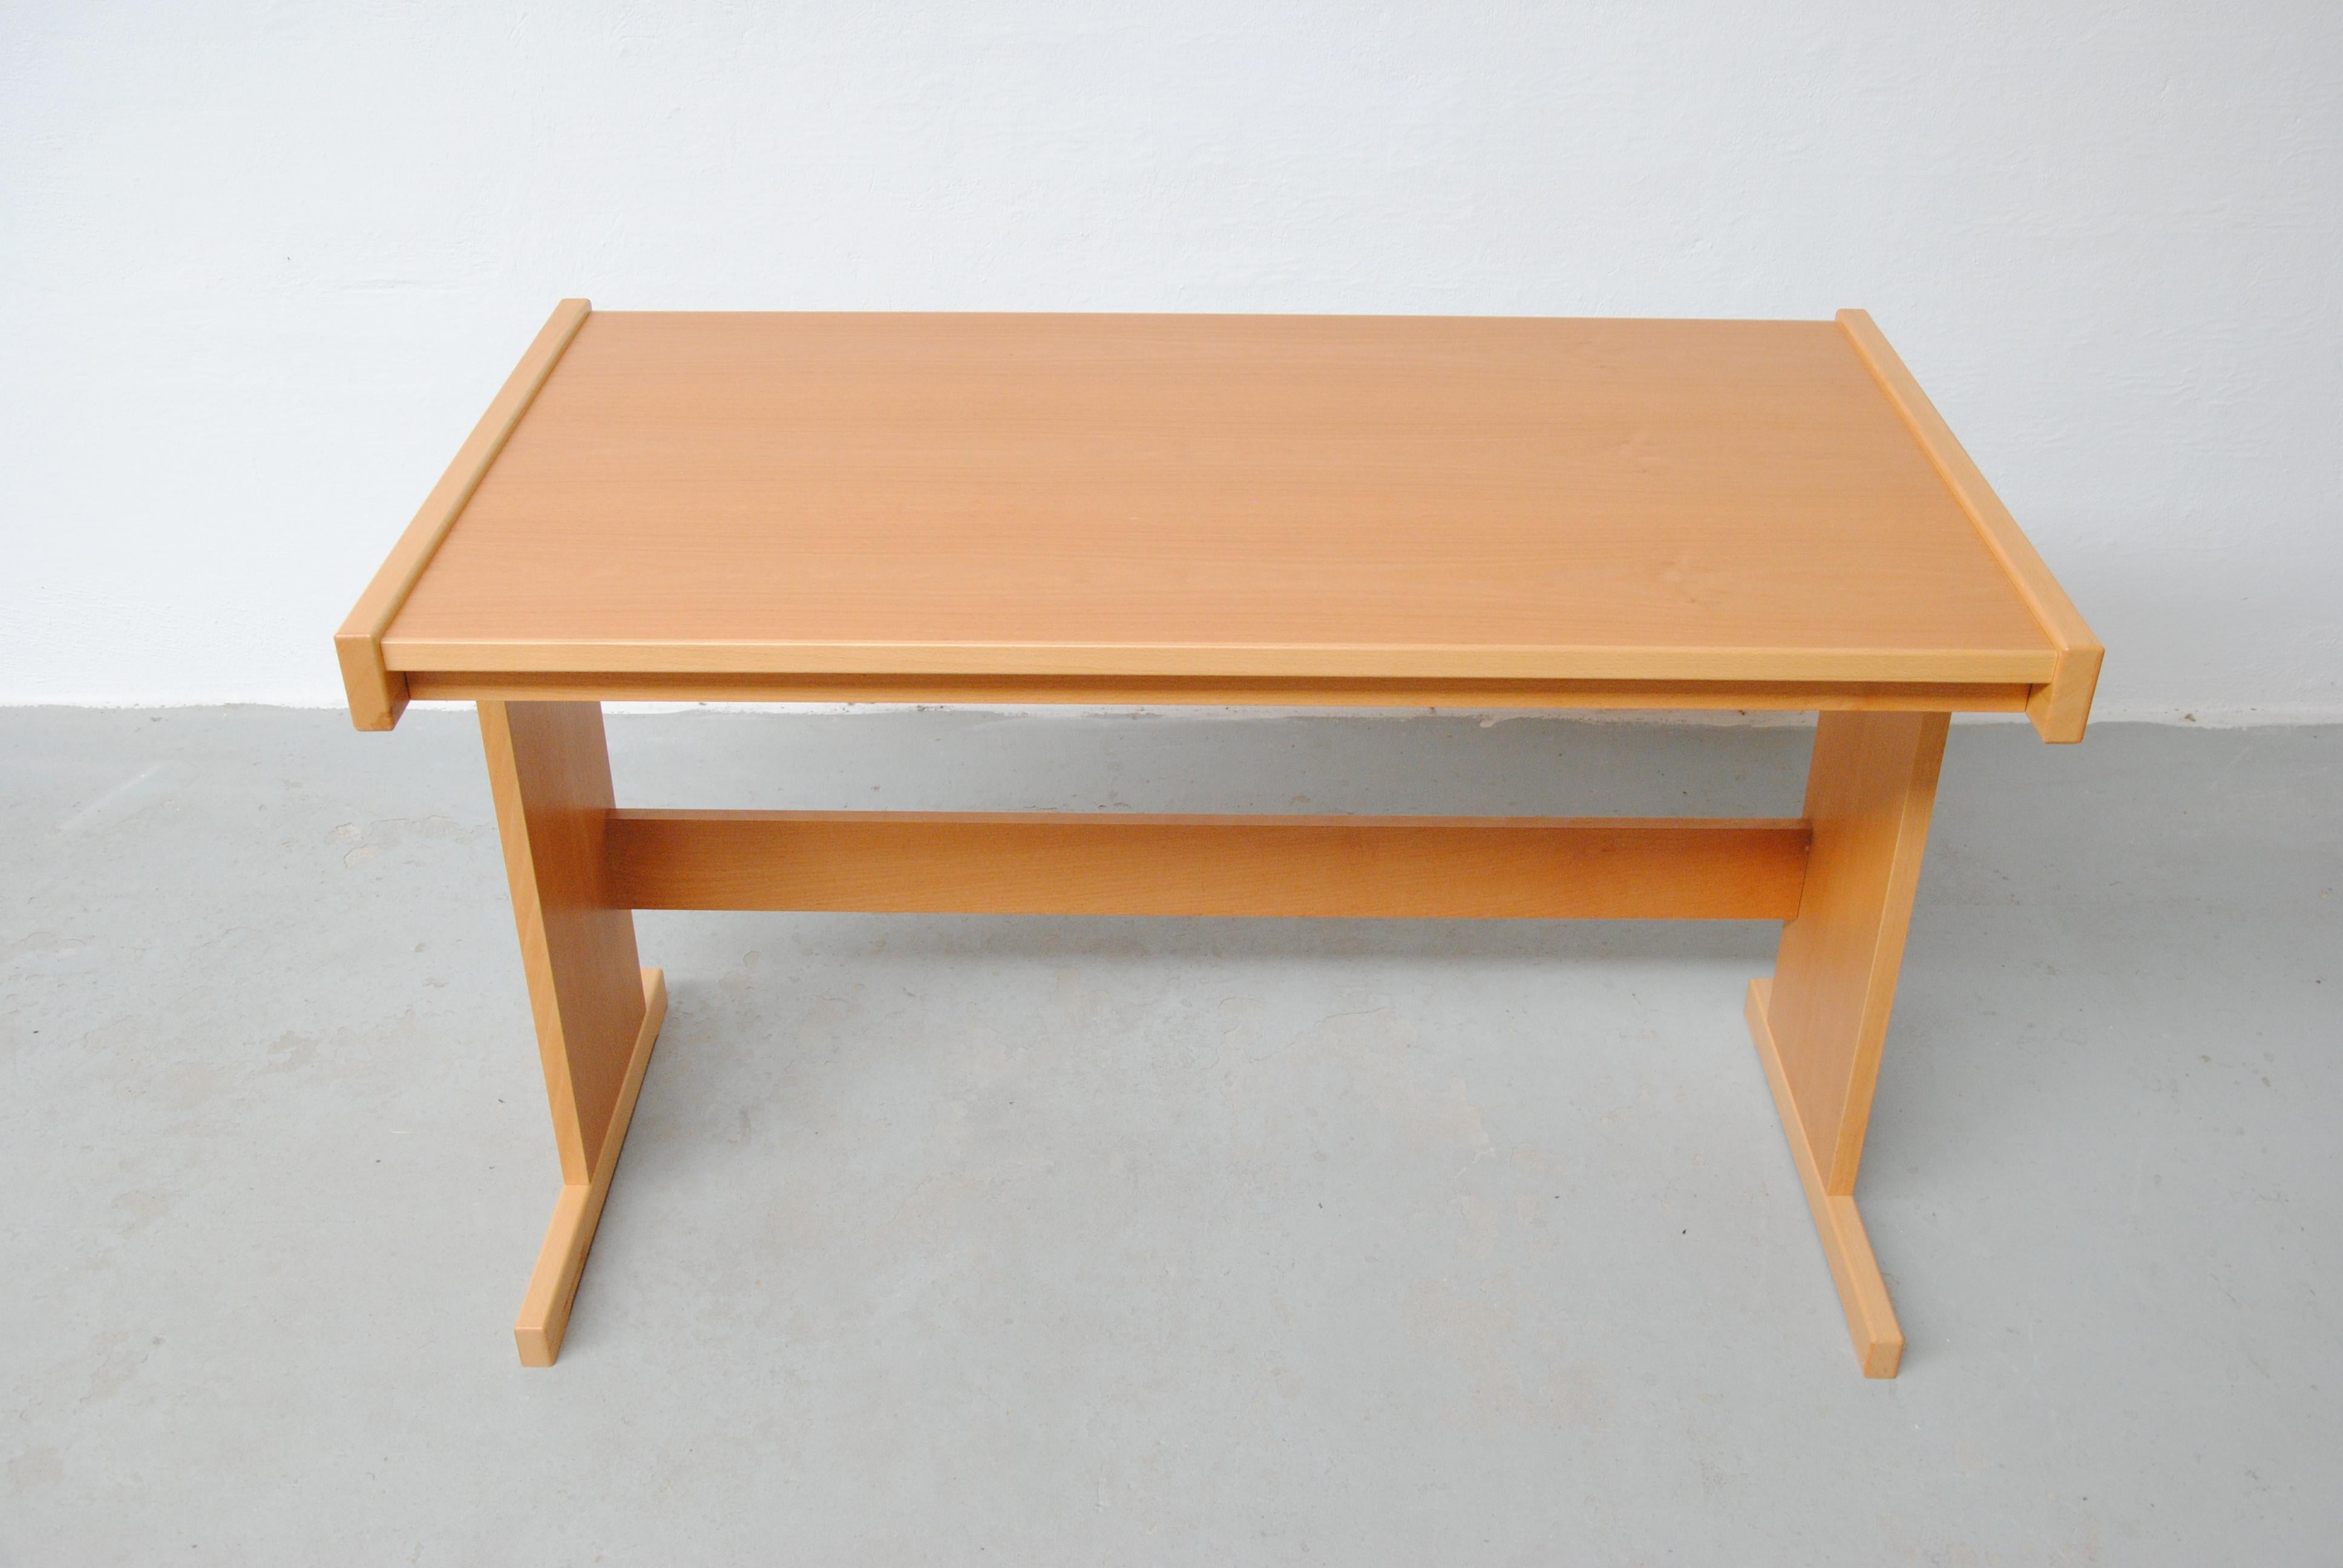 1990's Danish Bent Silberg Desk in Beech by Bent Silberg Mobler In Excellent Condition For Sale In Knebel, DK